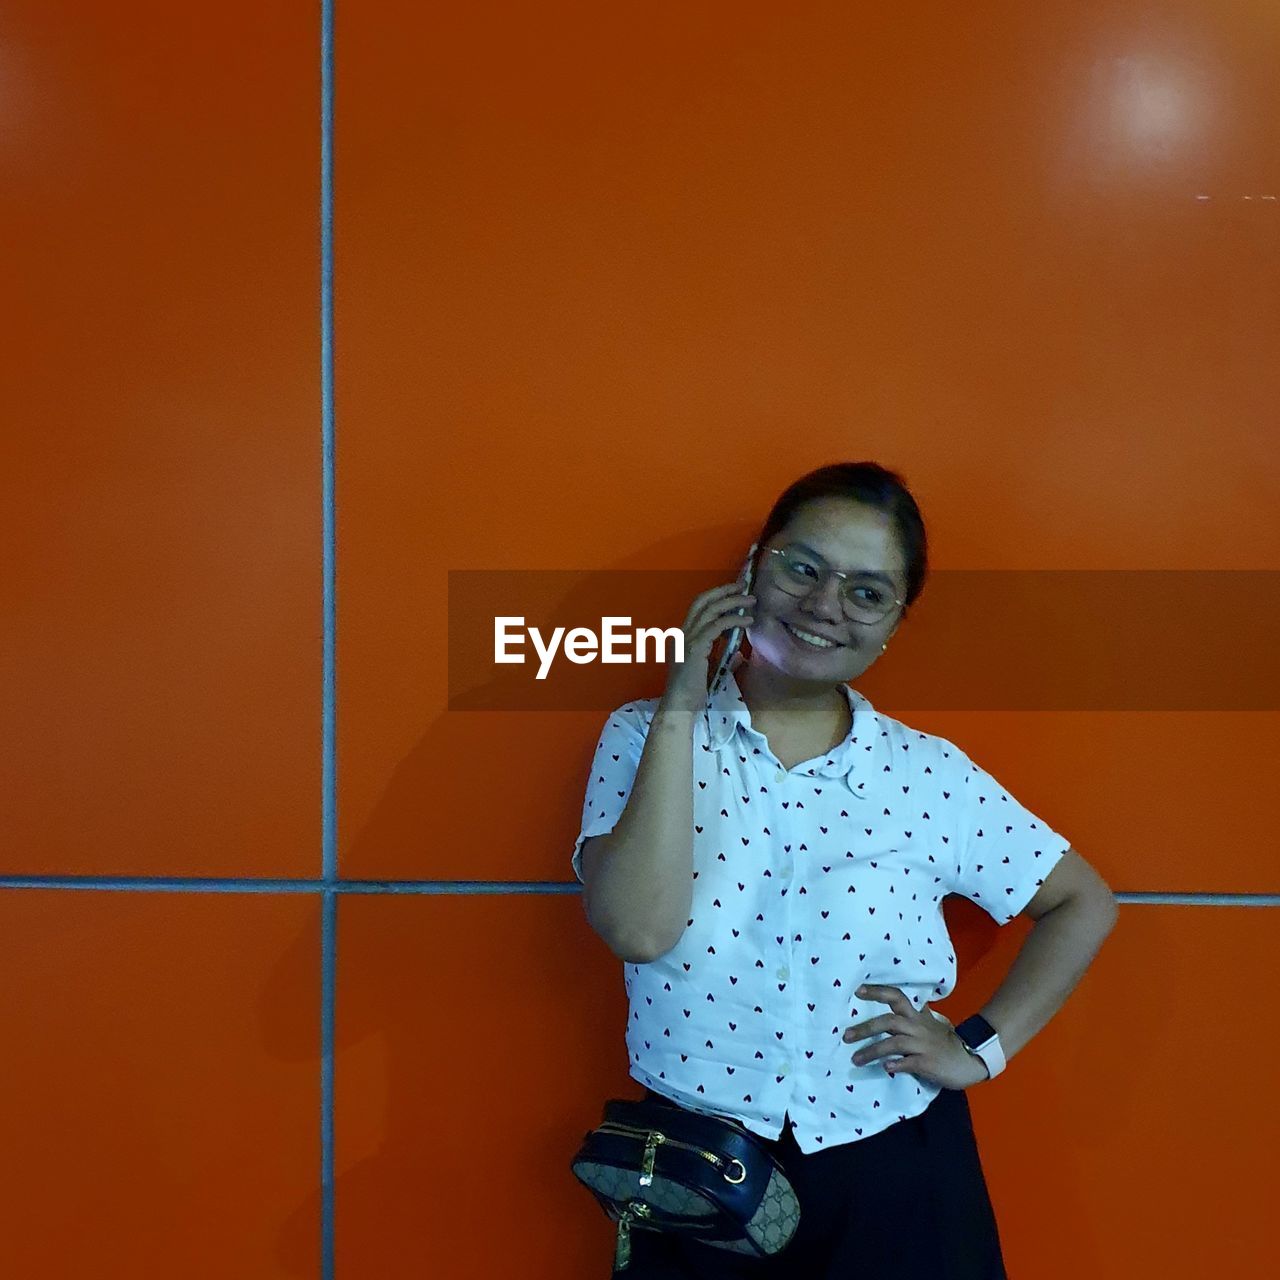 PORTRAIT OF A SMILING YOUNG WOMAN STANDING AGAINST ORANGE WALL